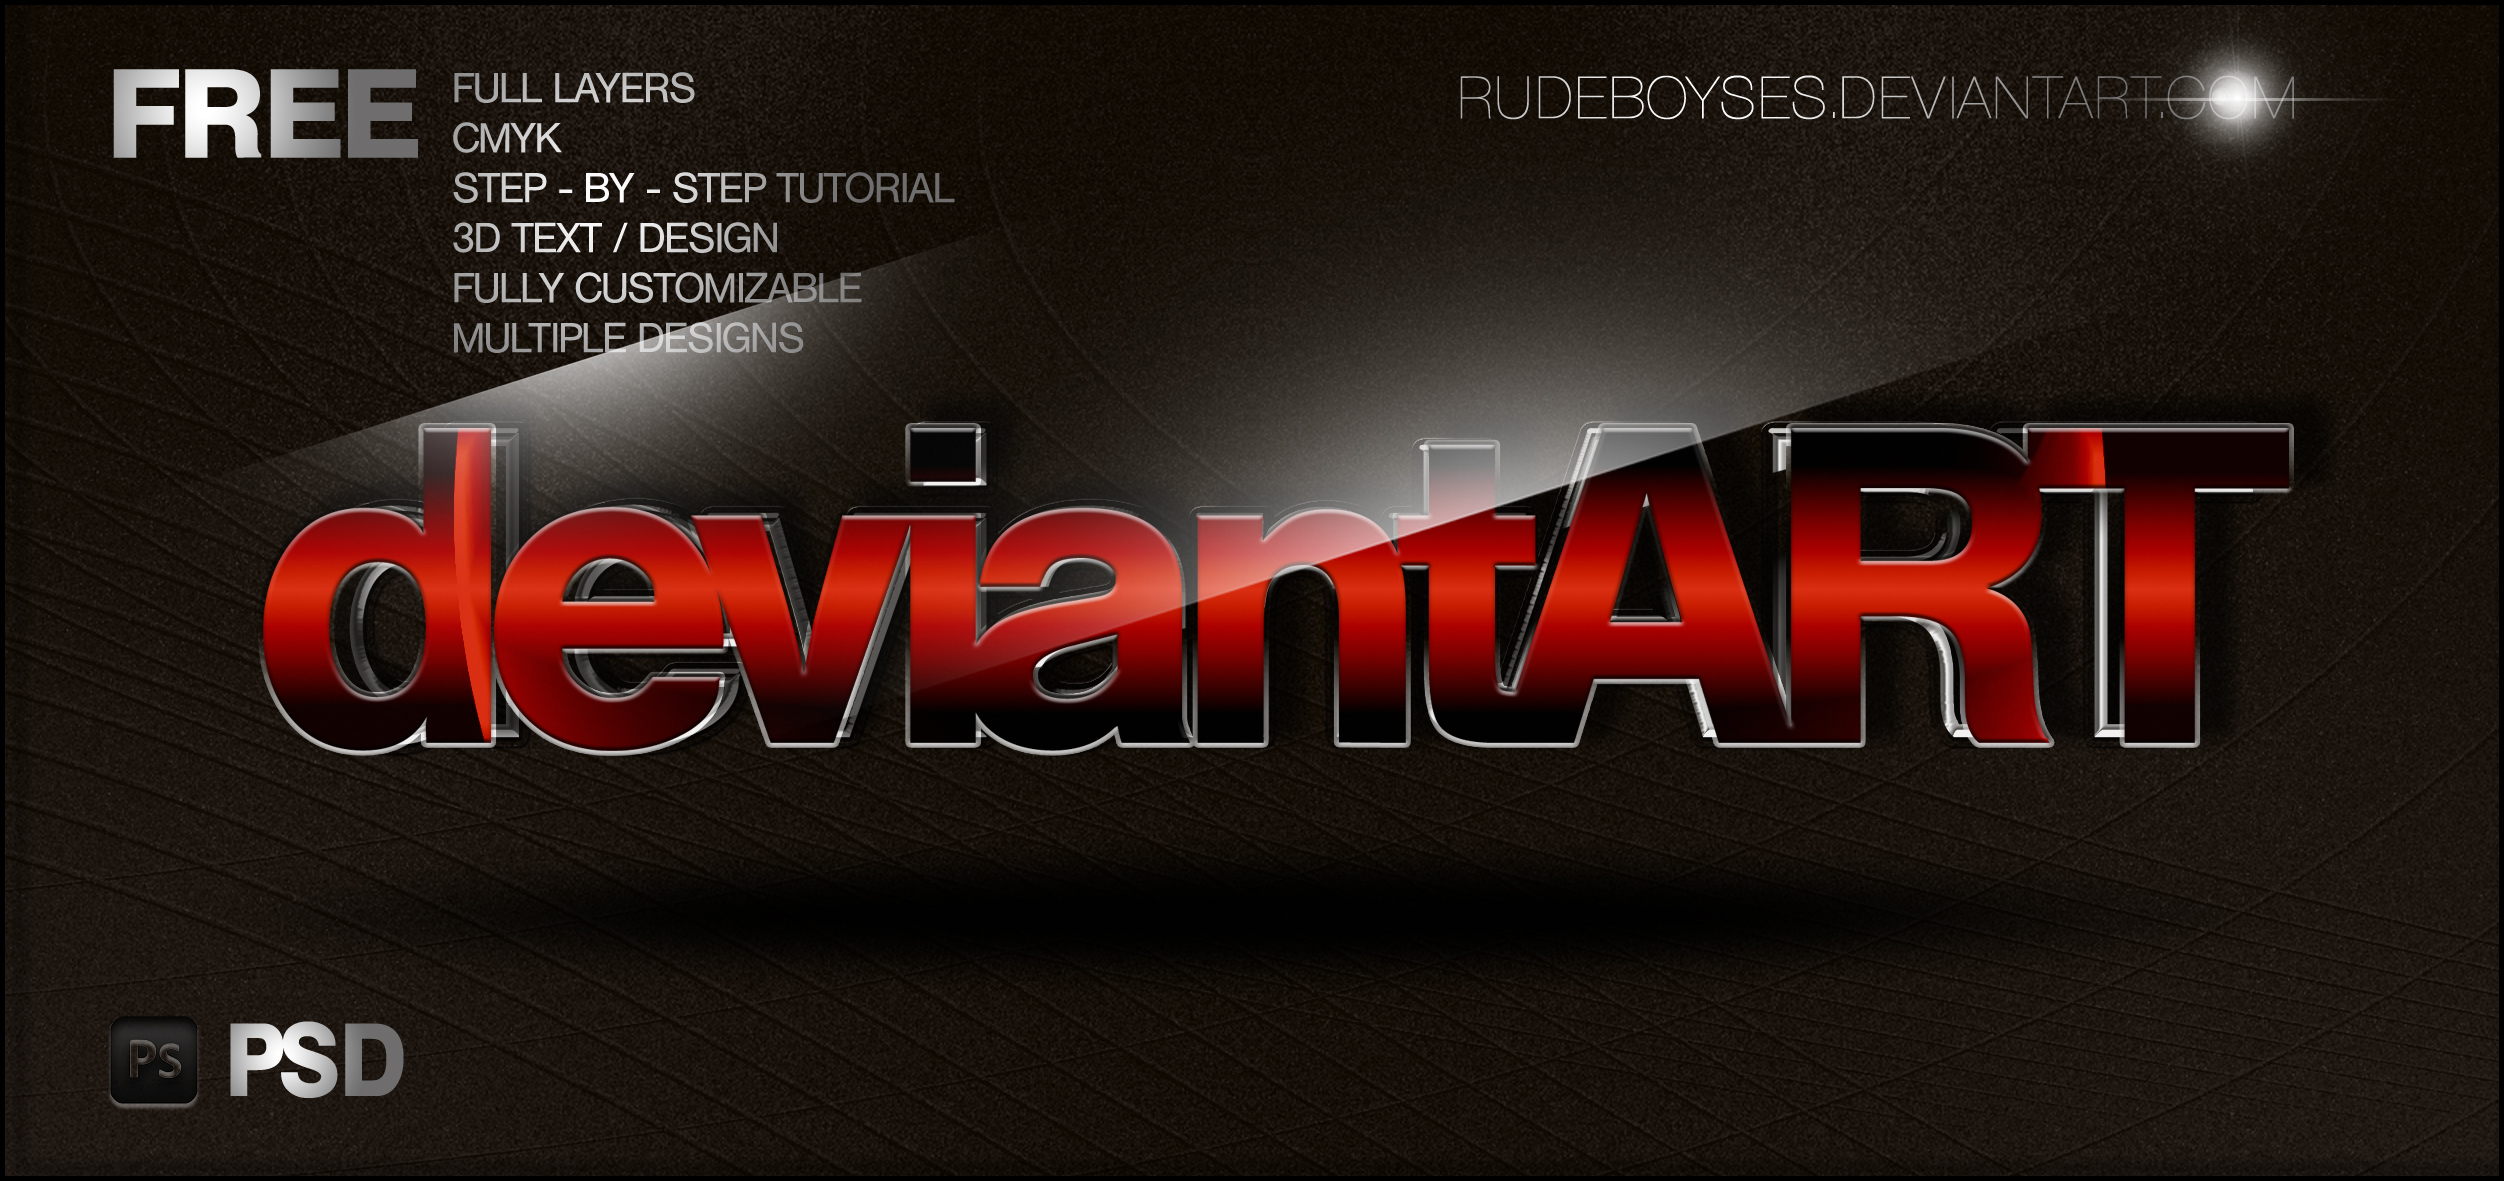 Free 3D Text PSD Graphics By RudeBoySes On DeviantArt